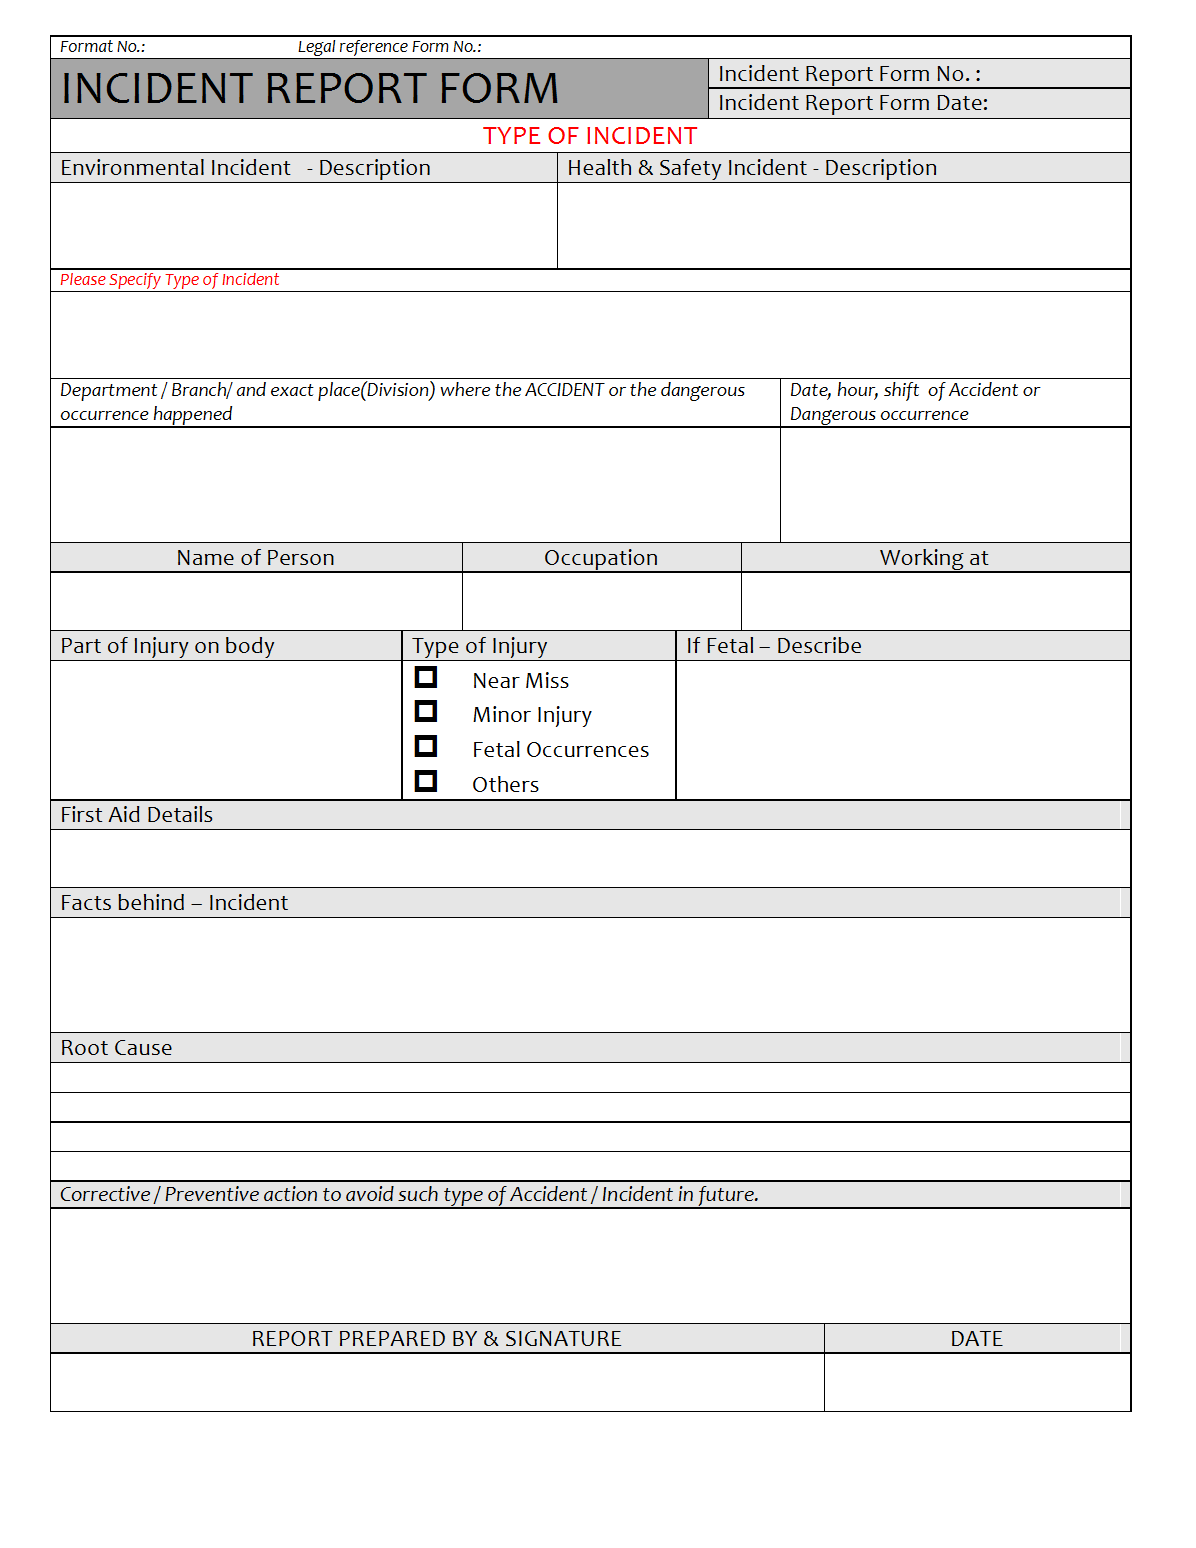 Incident Report form - For Incident Report Log Template